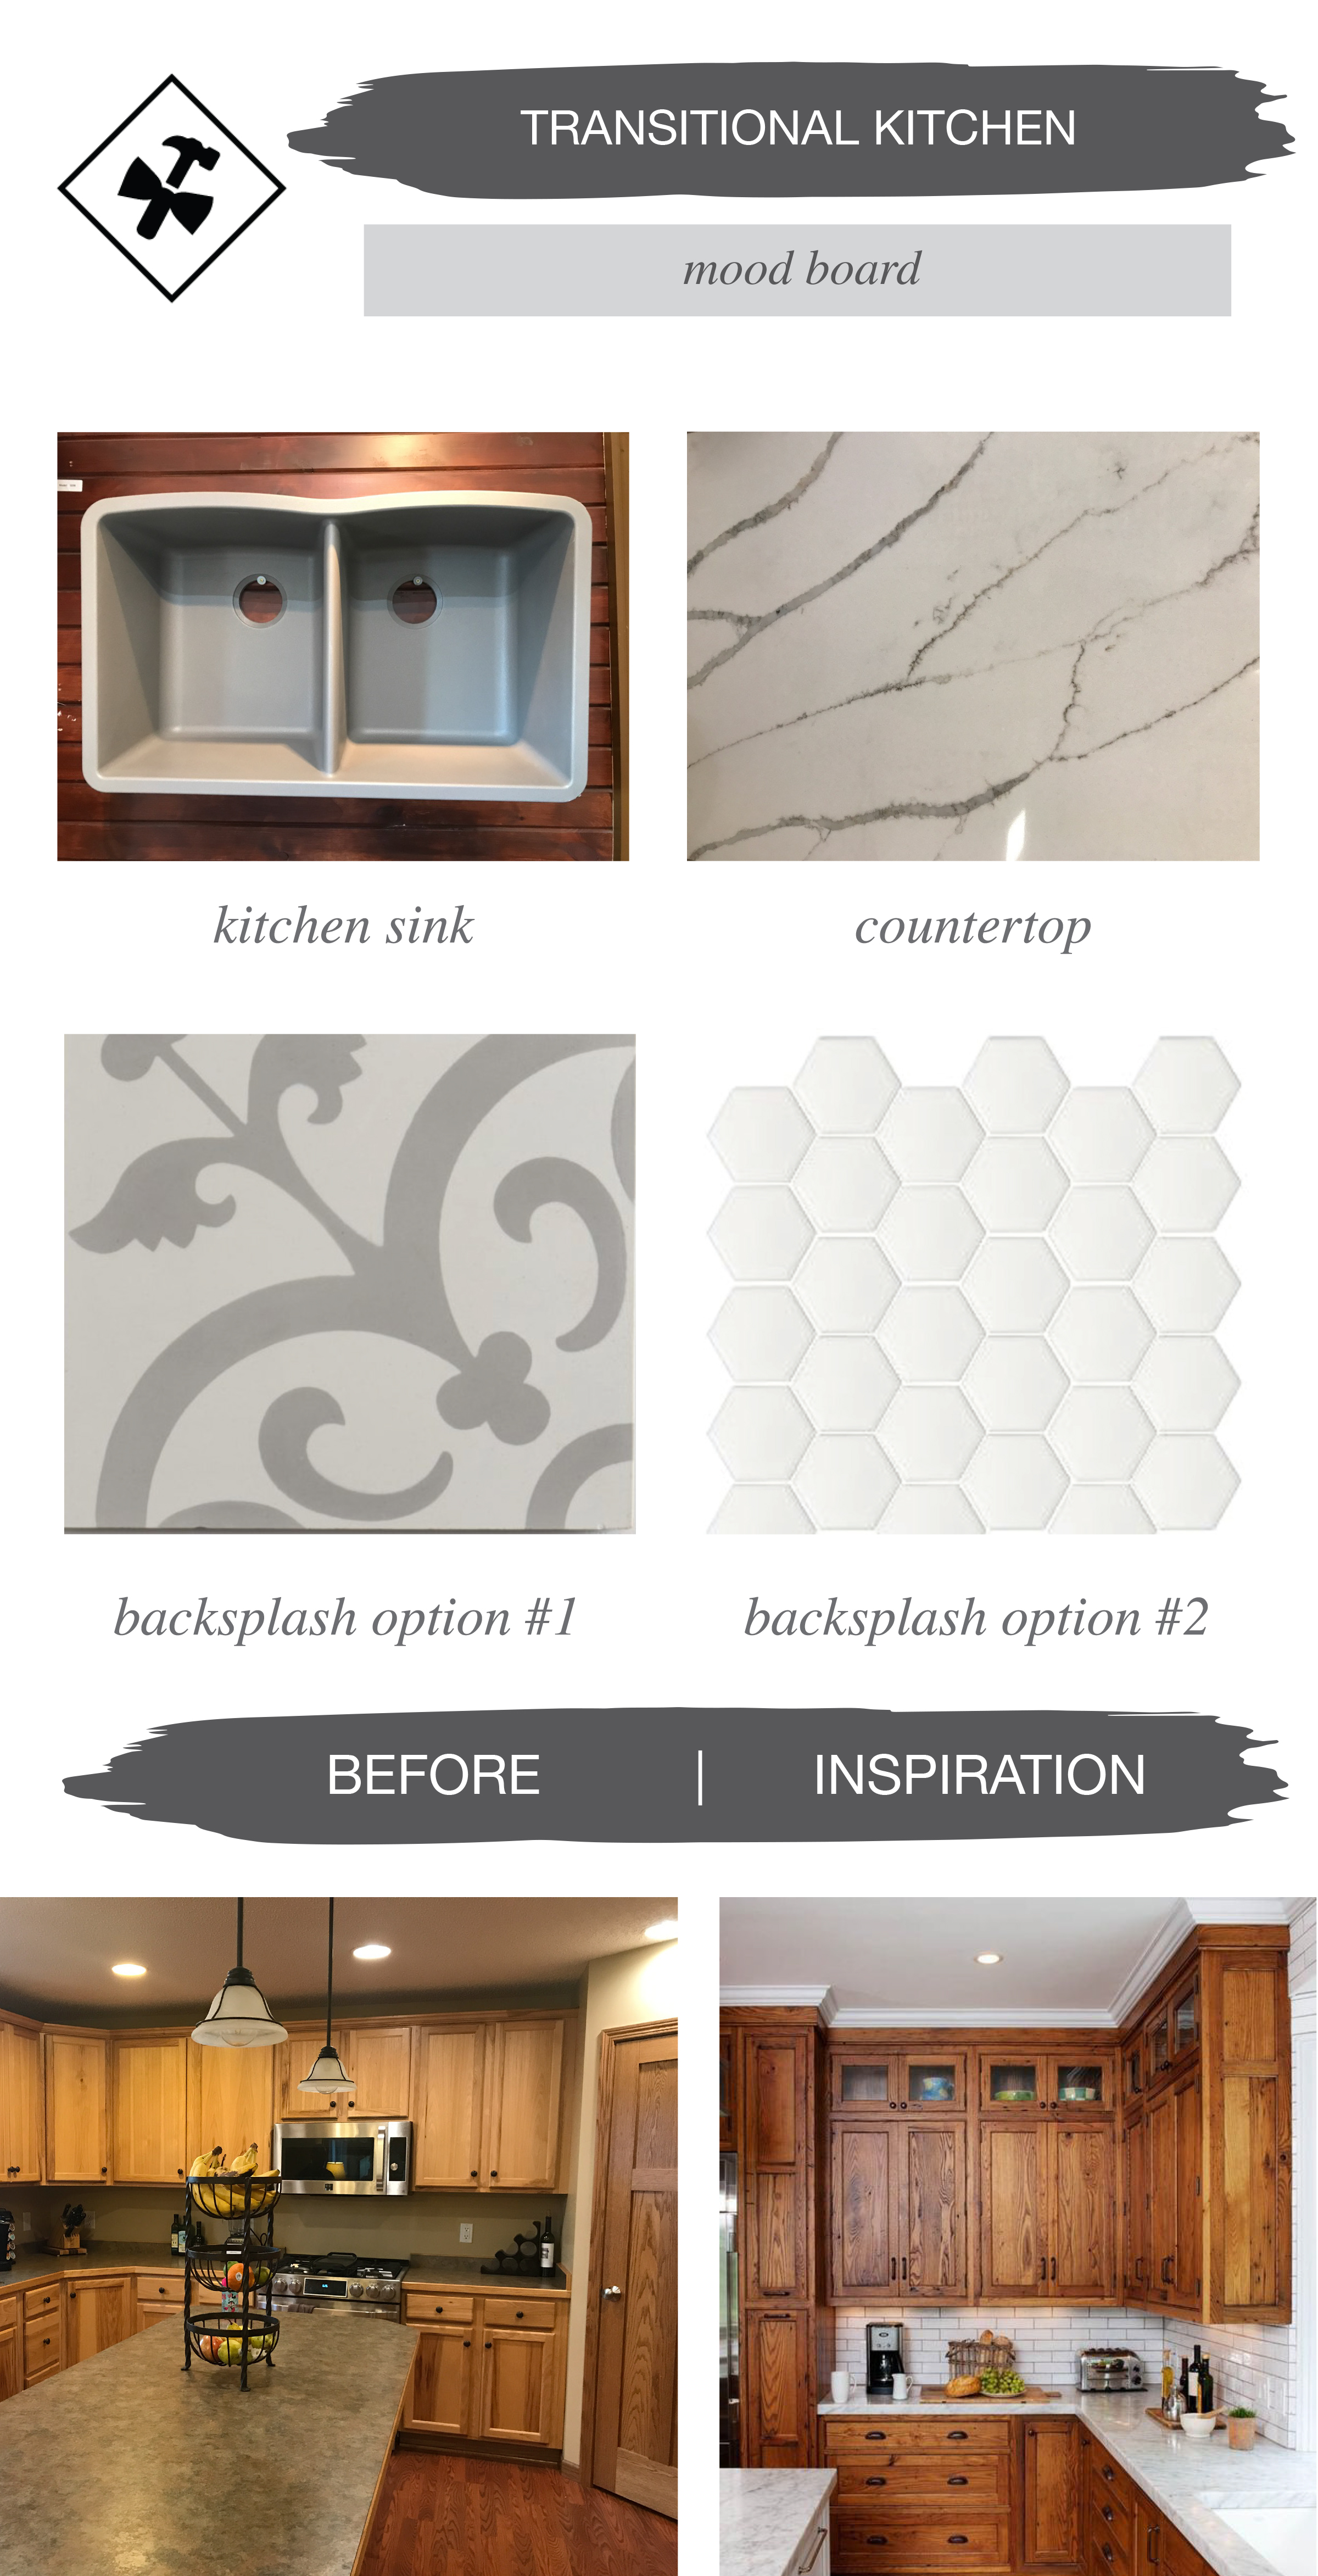 transitional kitchen mood board | construction2style